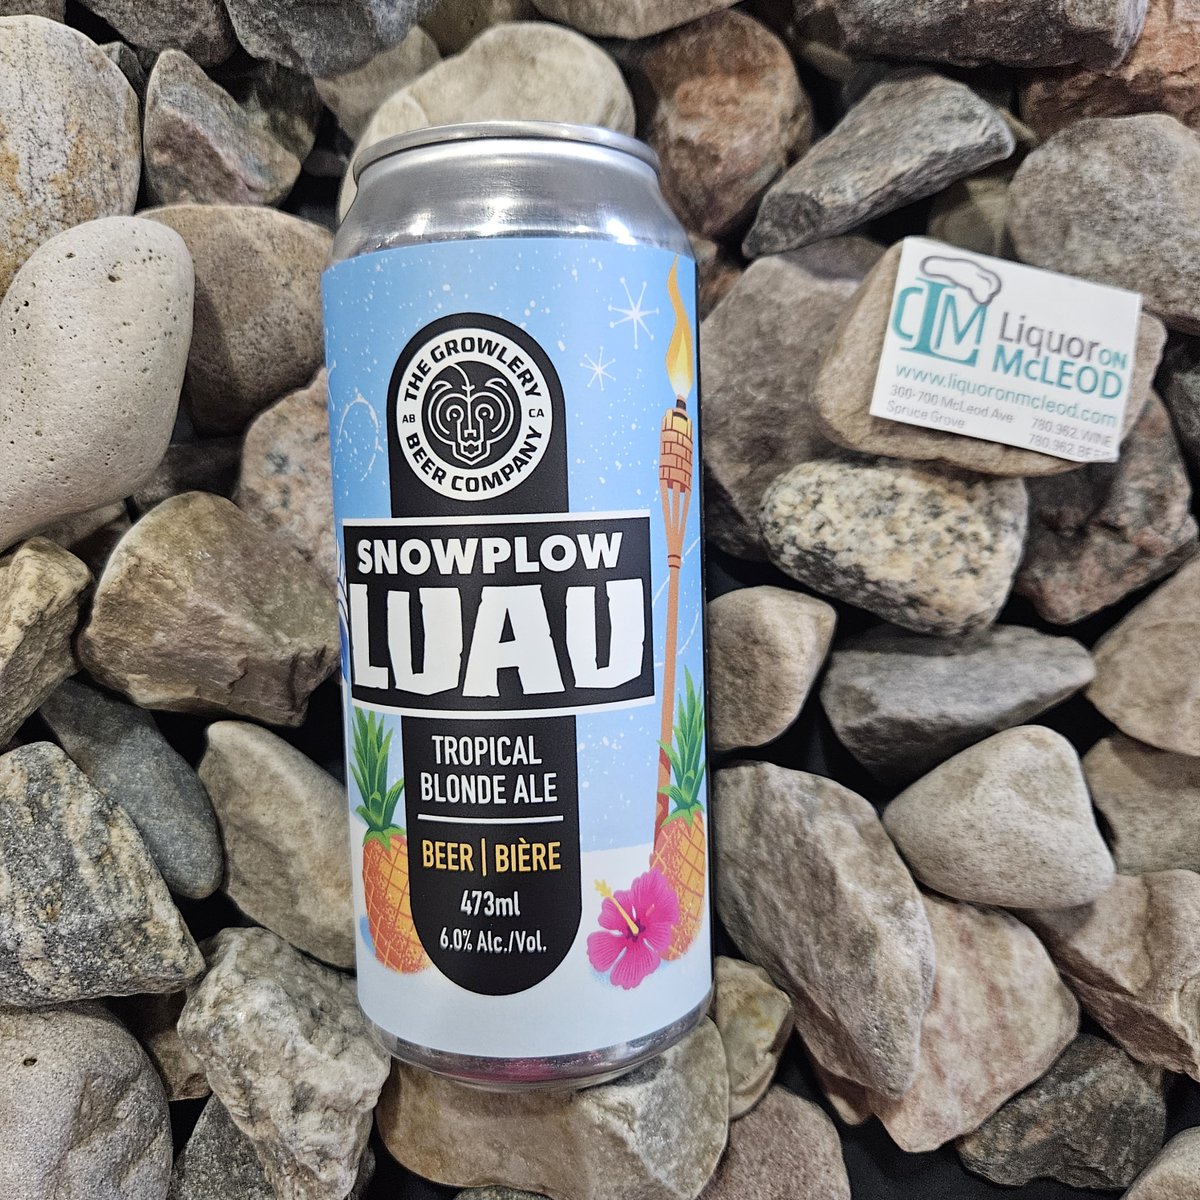 Snowplow Luau from @growlerybeer is a punchy pineapple delight that will transport you to paradise. It is filled with heavy tropical notes in the aroma and flavor from the hops and a big blast of real pineapple. #sprucegrove #stonyplain #liquoronmcleod #growlerybeer #yegbeer